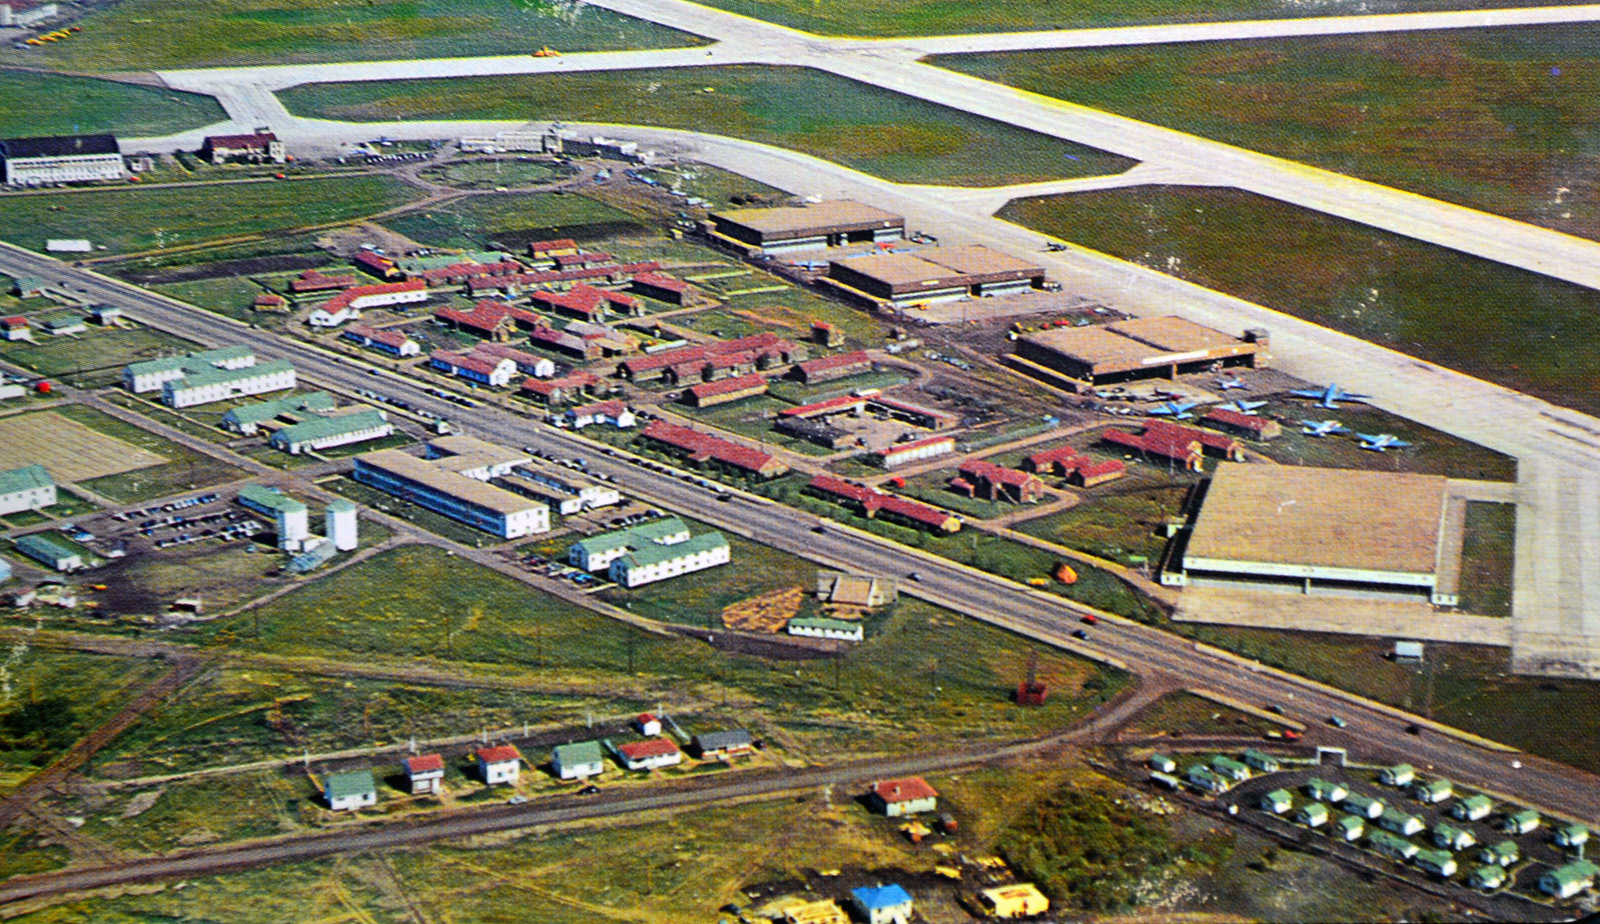 Aerial view of North West Air Command Buildings in the late 1940s